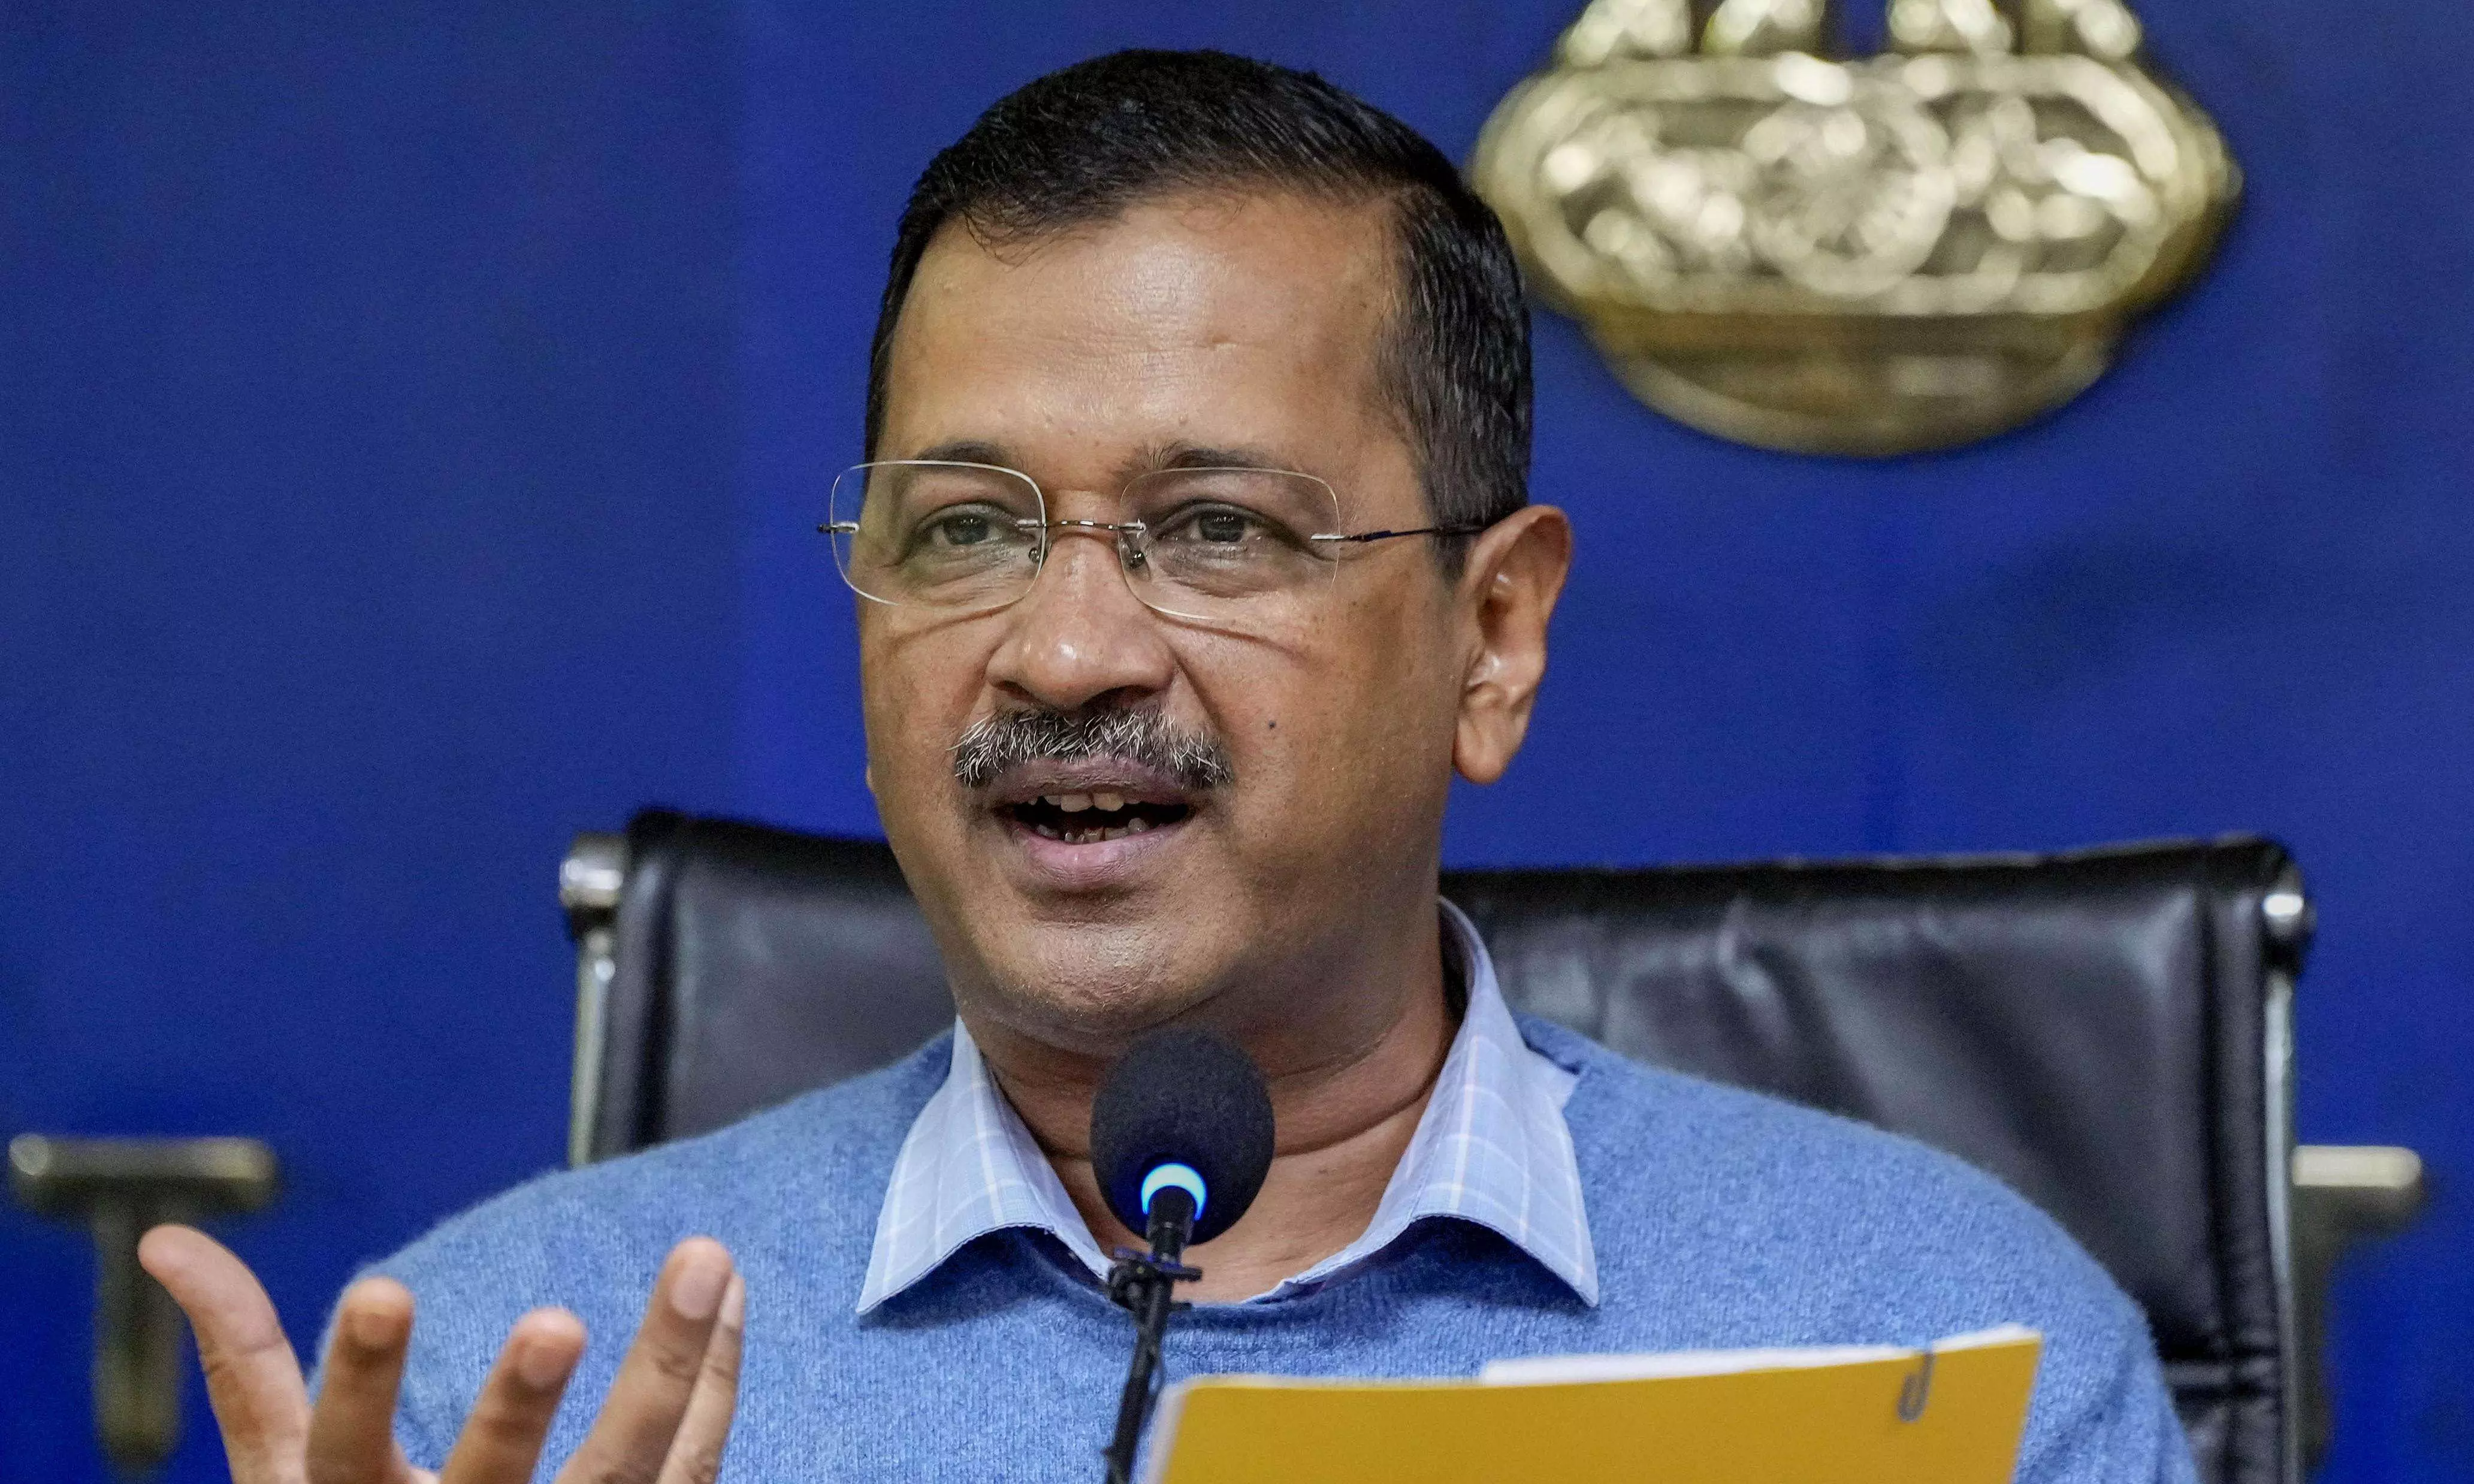 Nitish did not do right thing by dumping alliance: Arvind Kejriwal